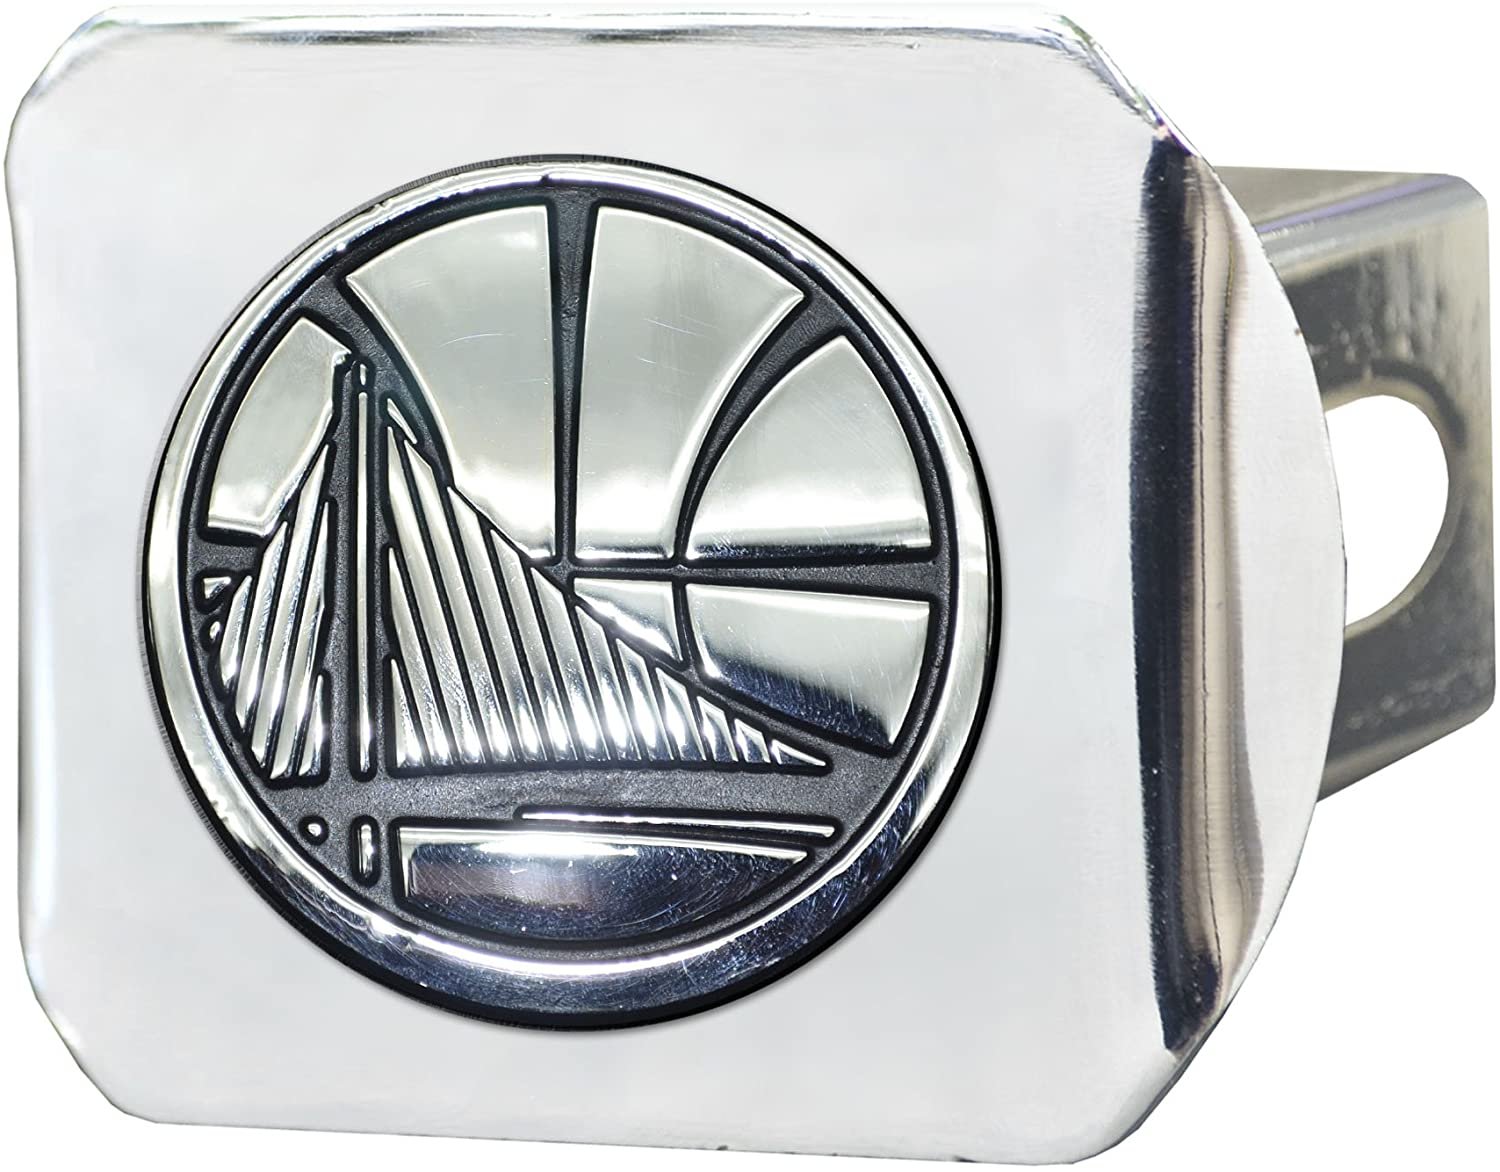 Golden State Warriors Hitch Cover Solid Metal with Raised Chrome Metal Emblem 2" Square Type III